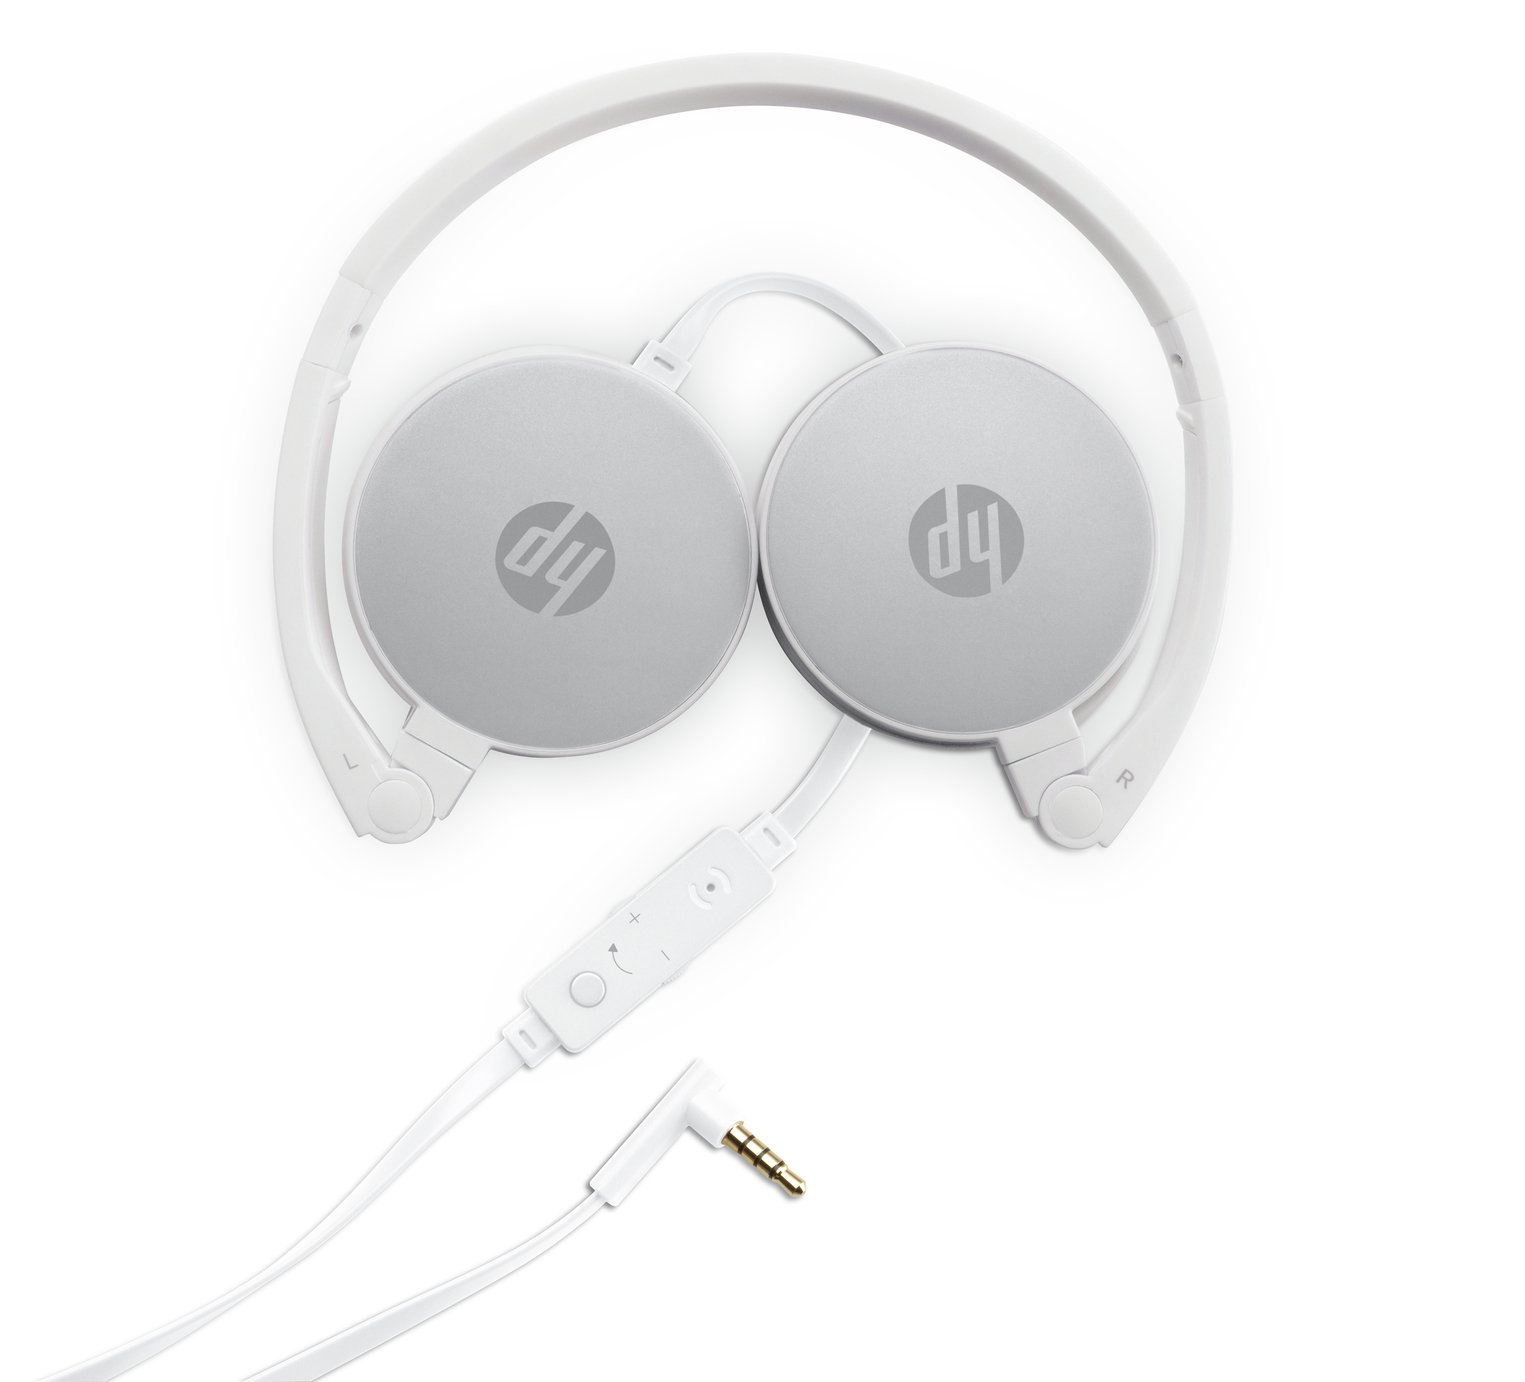 HP 2800 S PC Headset Review